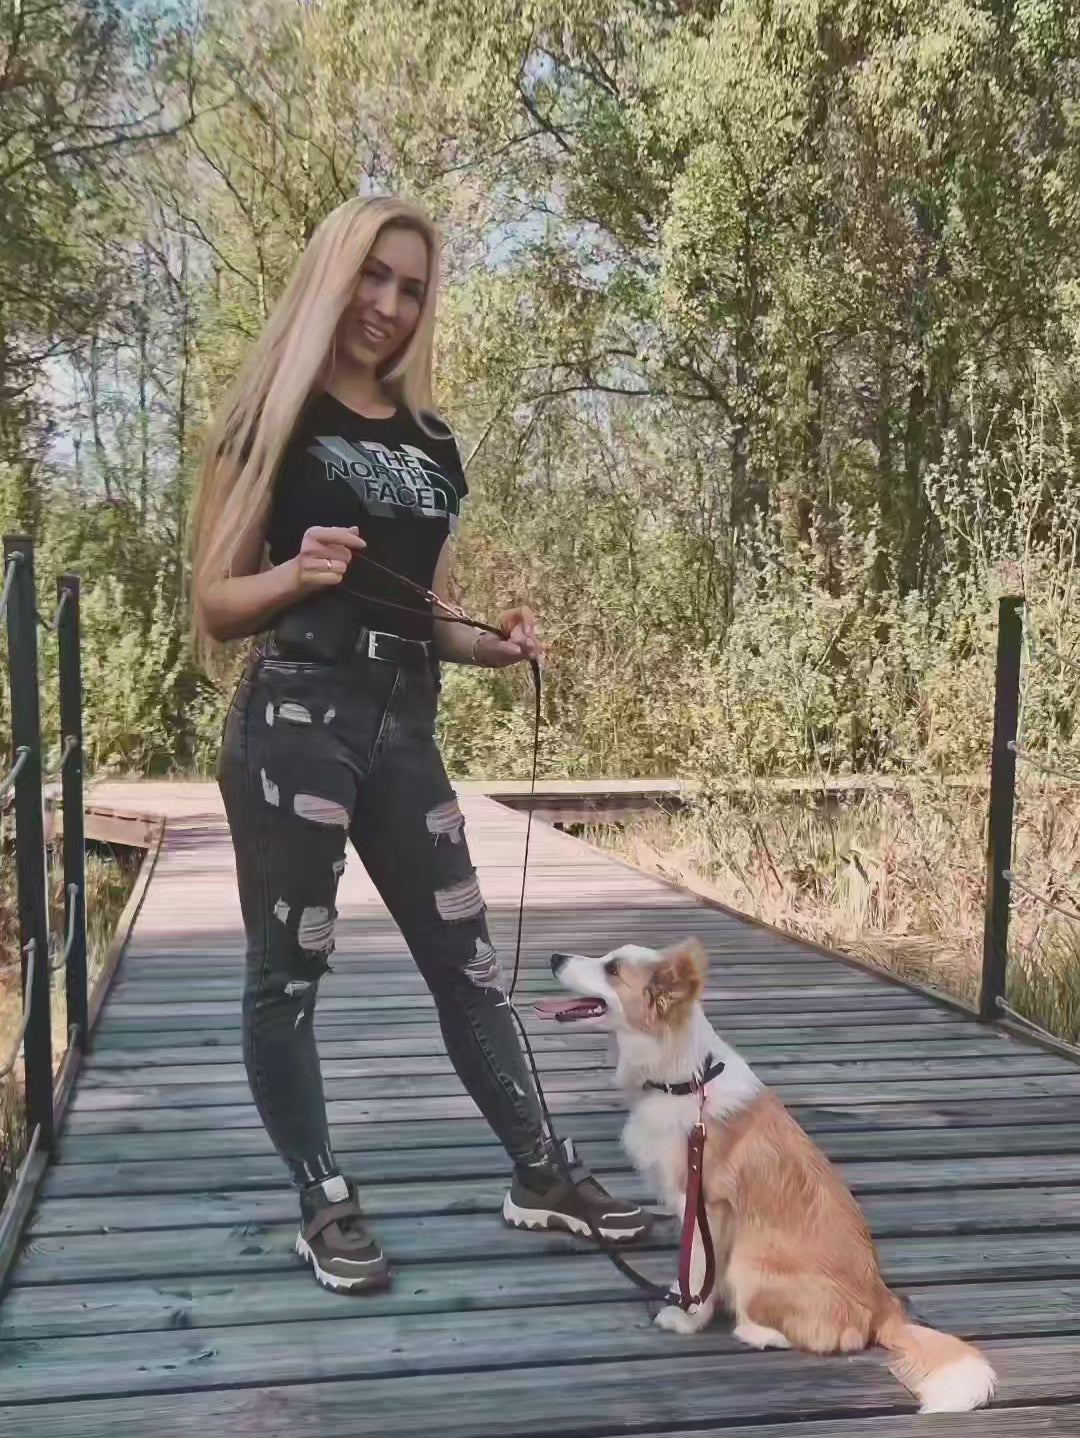 Video demonstration of a girl showcasing the versatile features of the Biothane Multifunctional Dog Leash with her dog. Explore the leash's functionality and style in action.